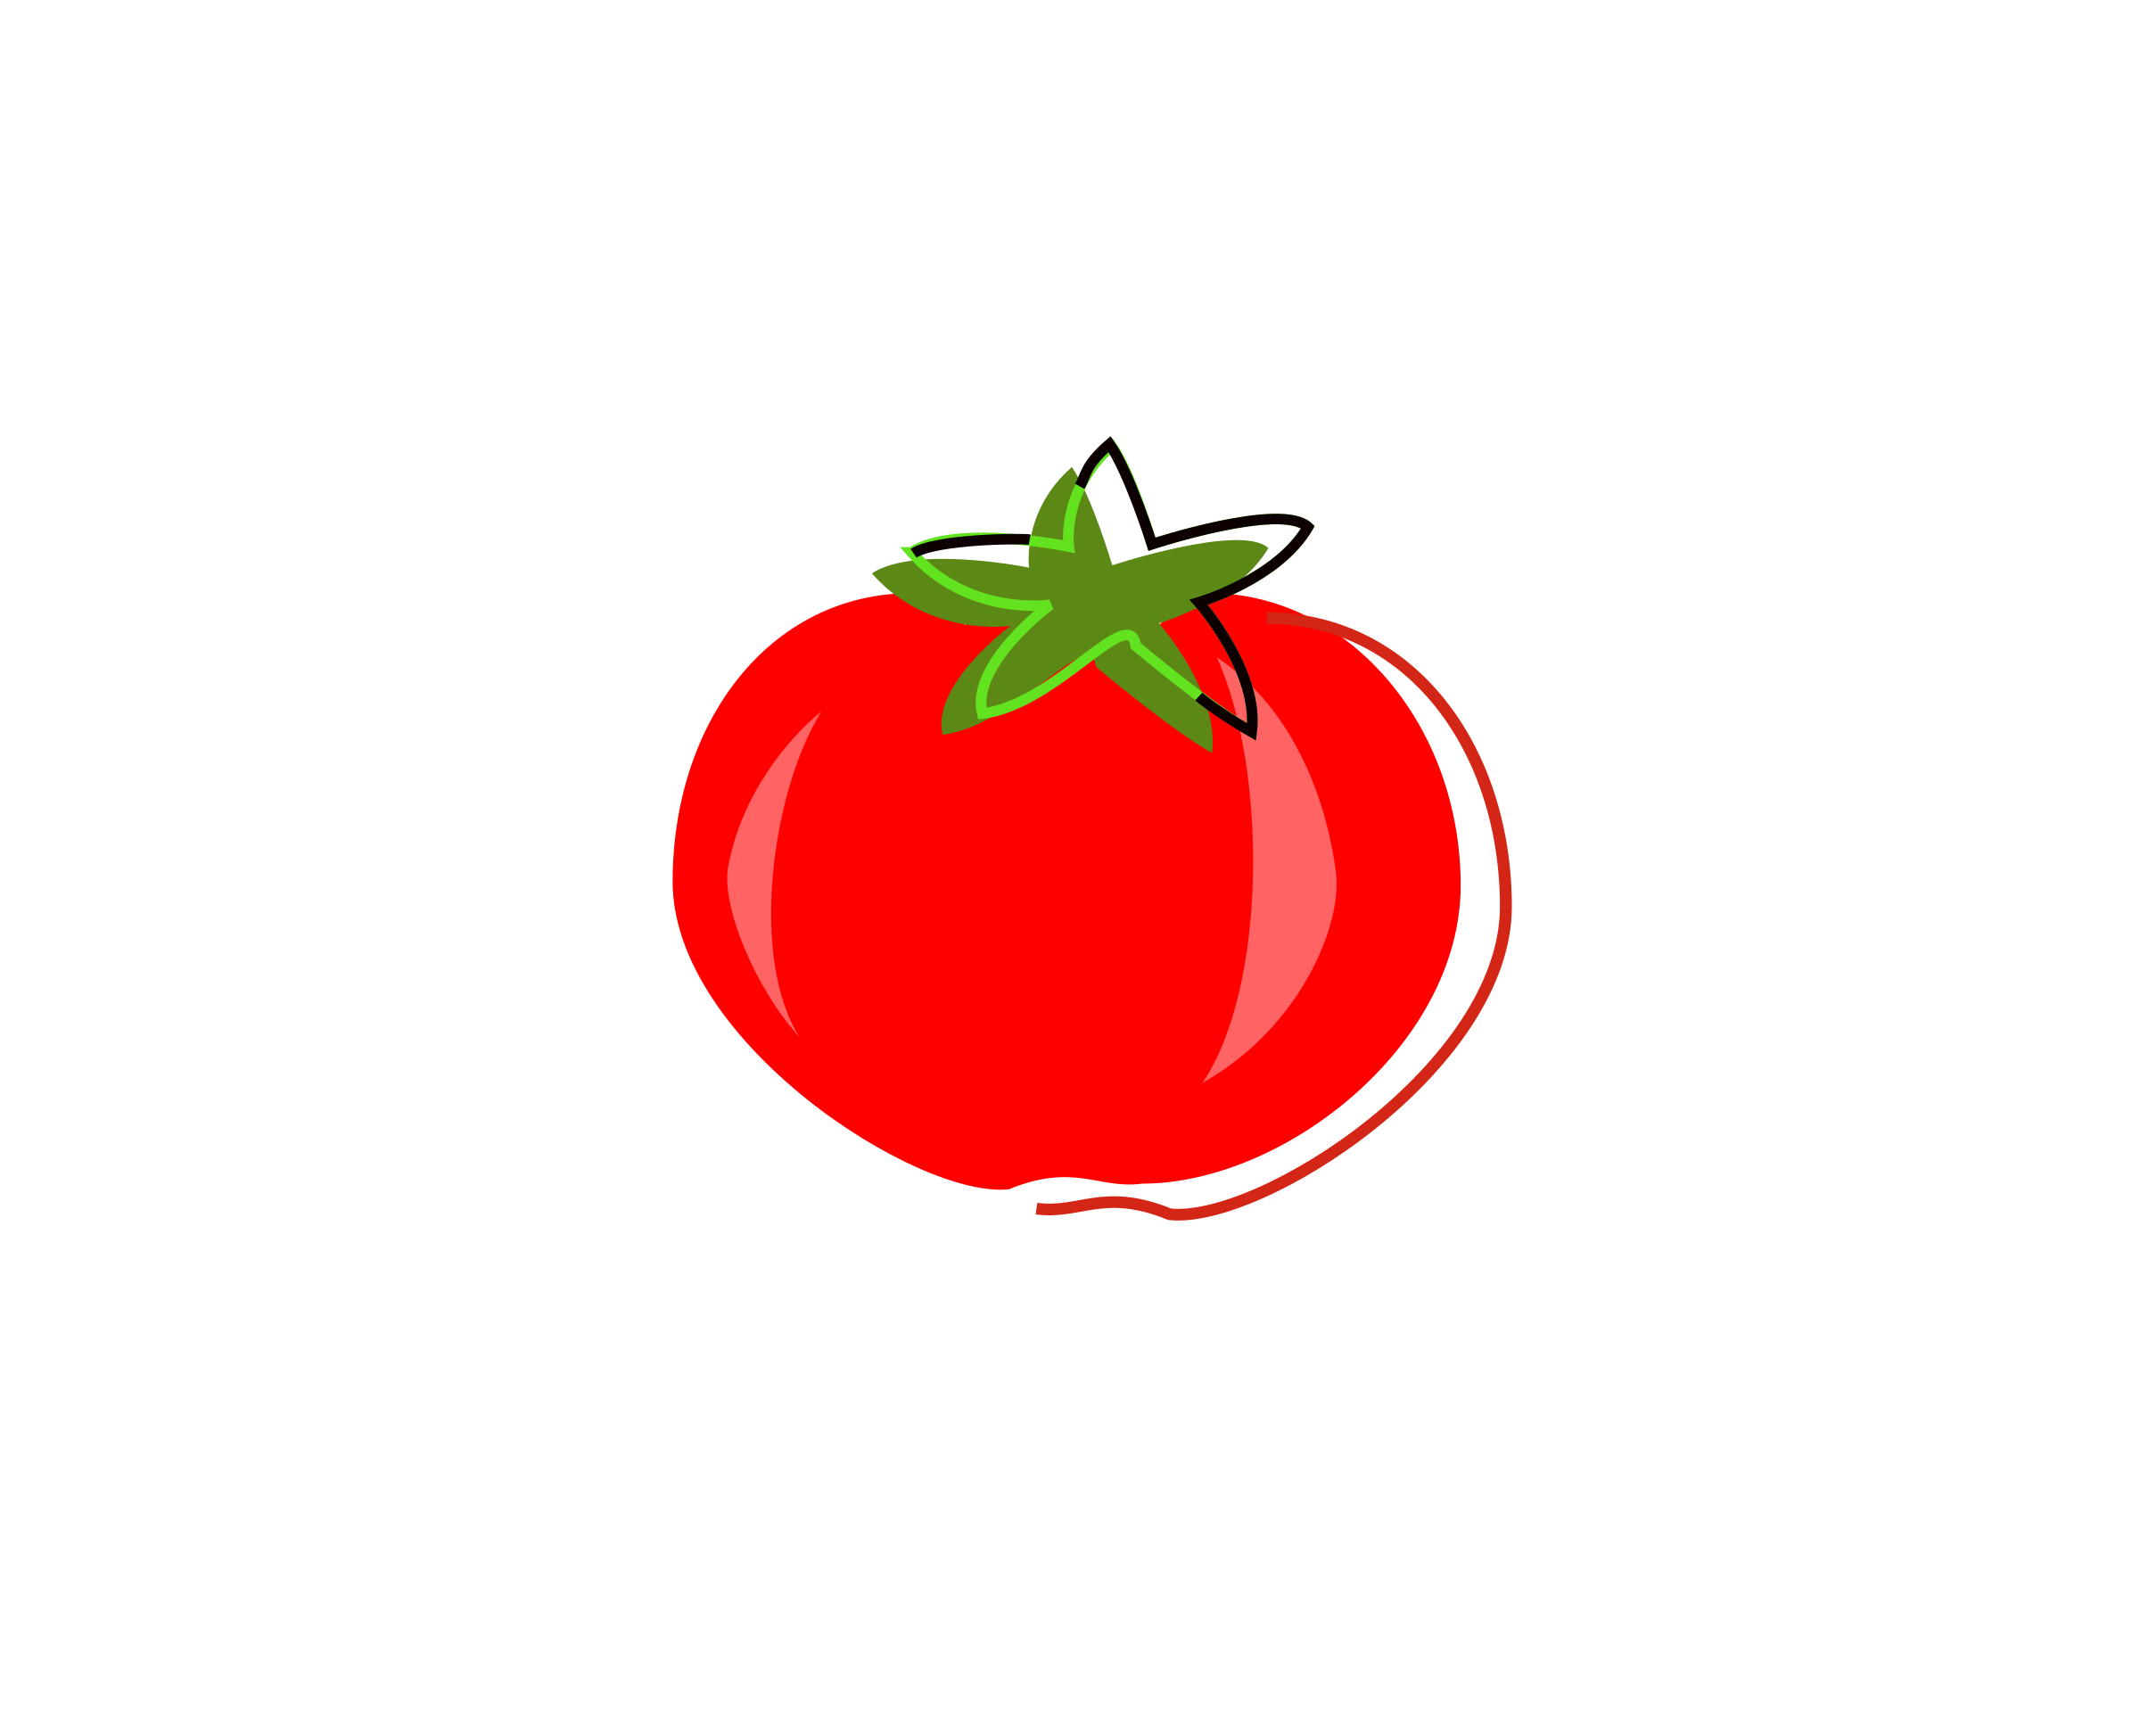 Tomatoes clipart logo. Vintage tomato icons png